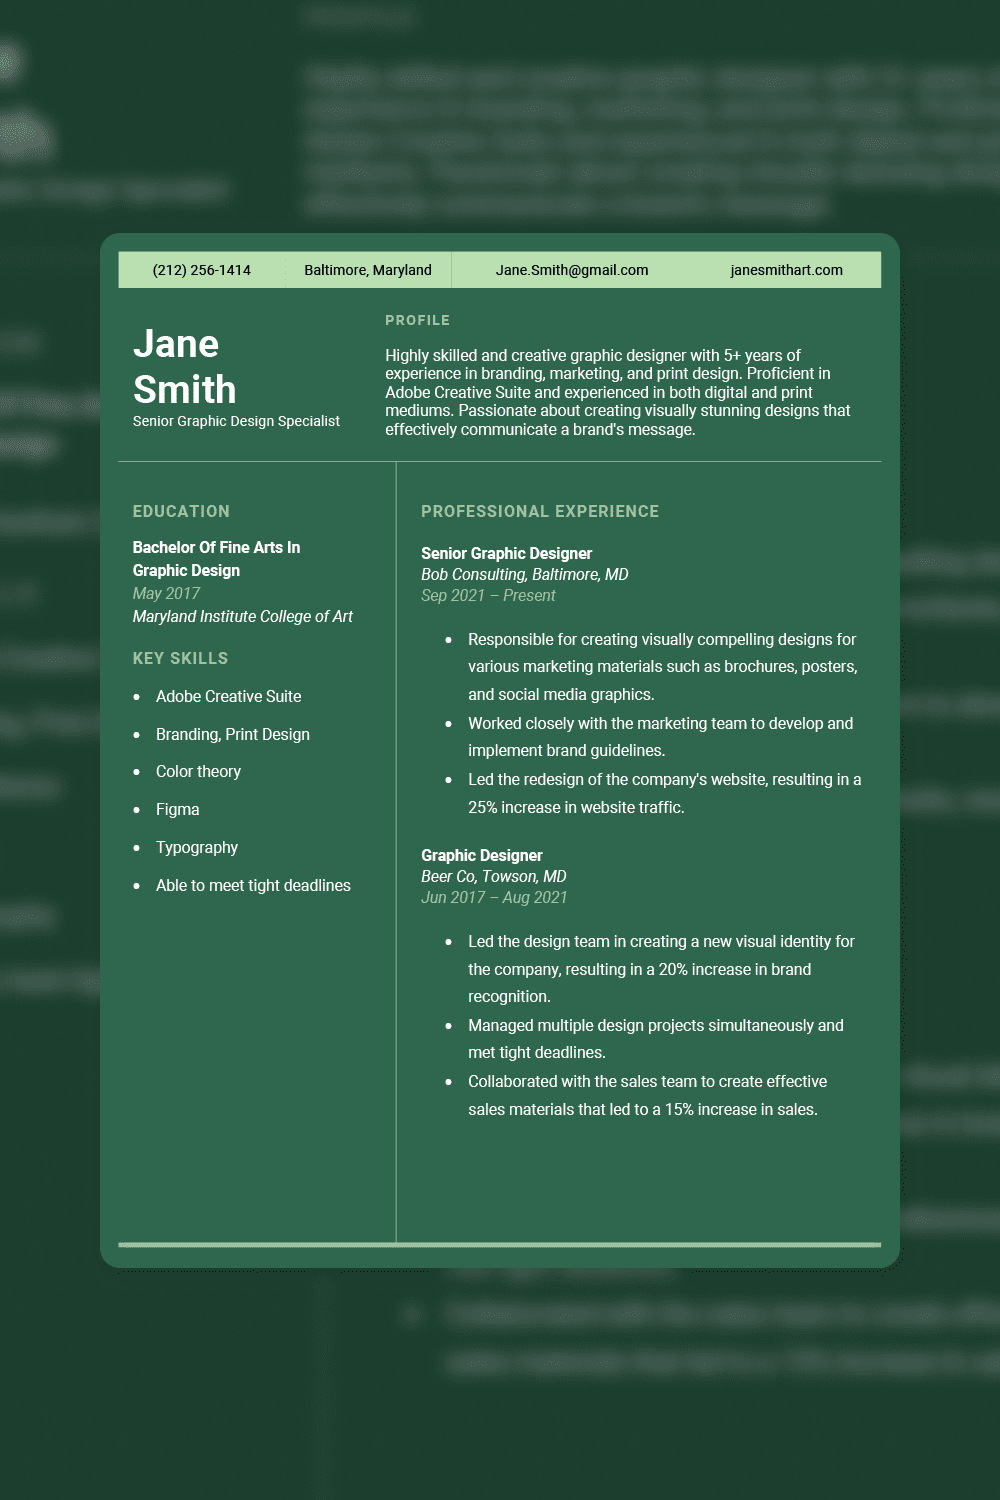 Resume image with green background and white text.